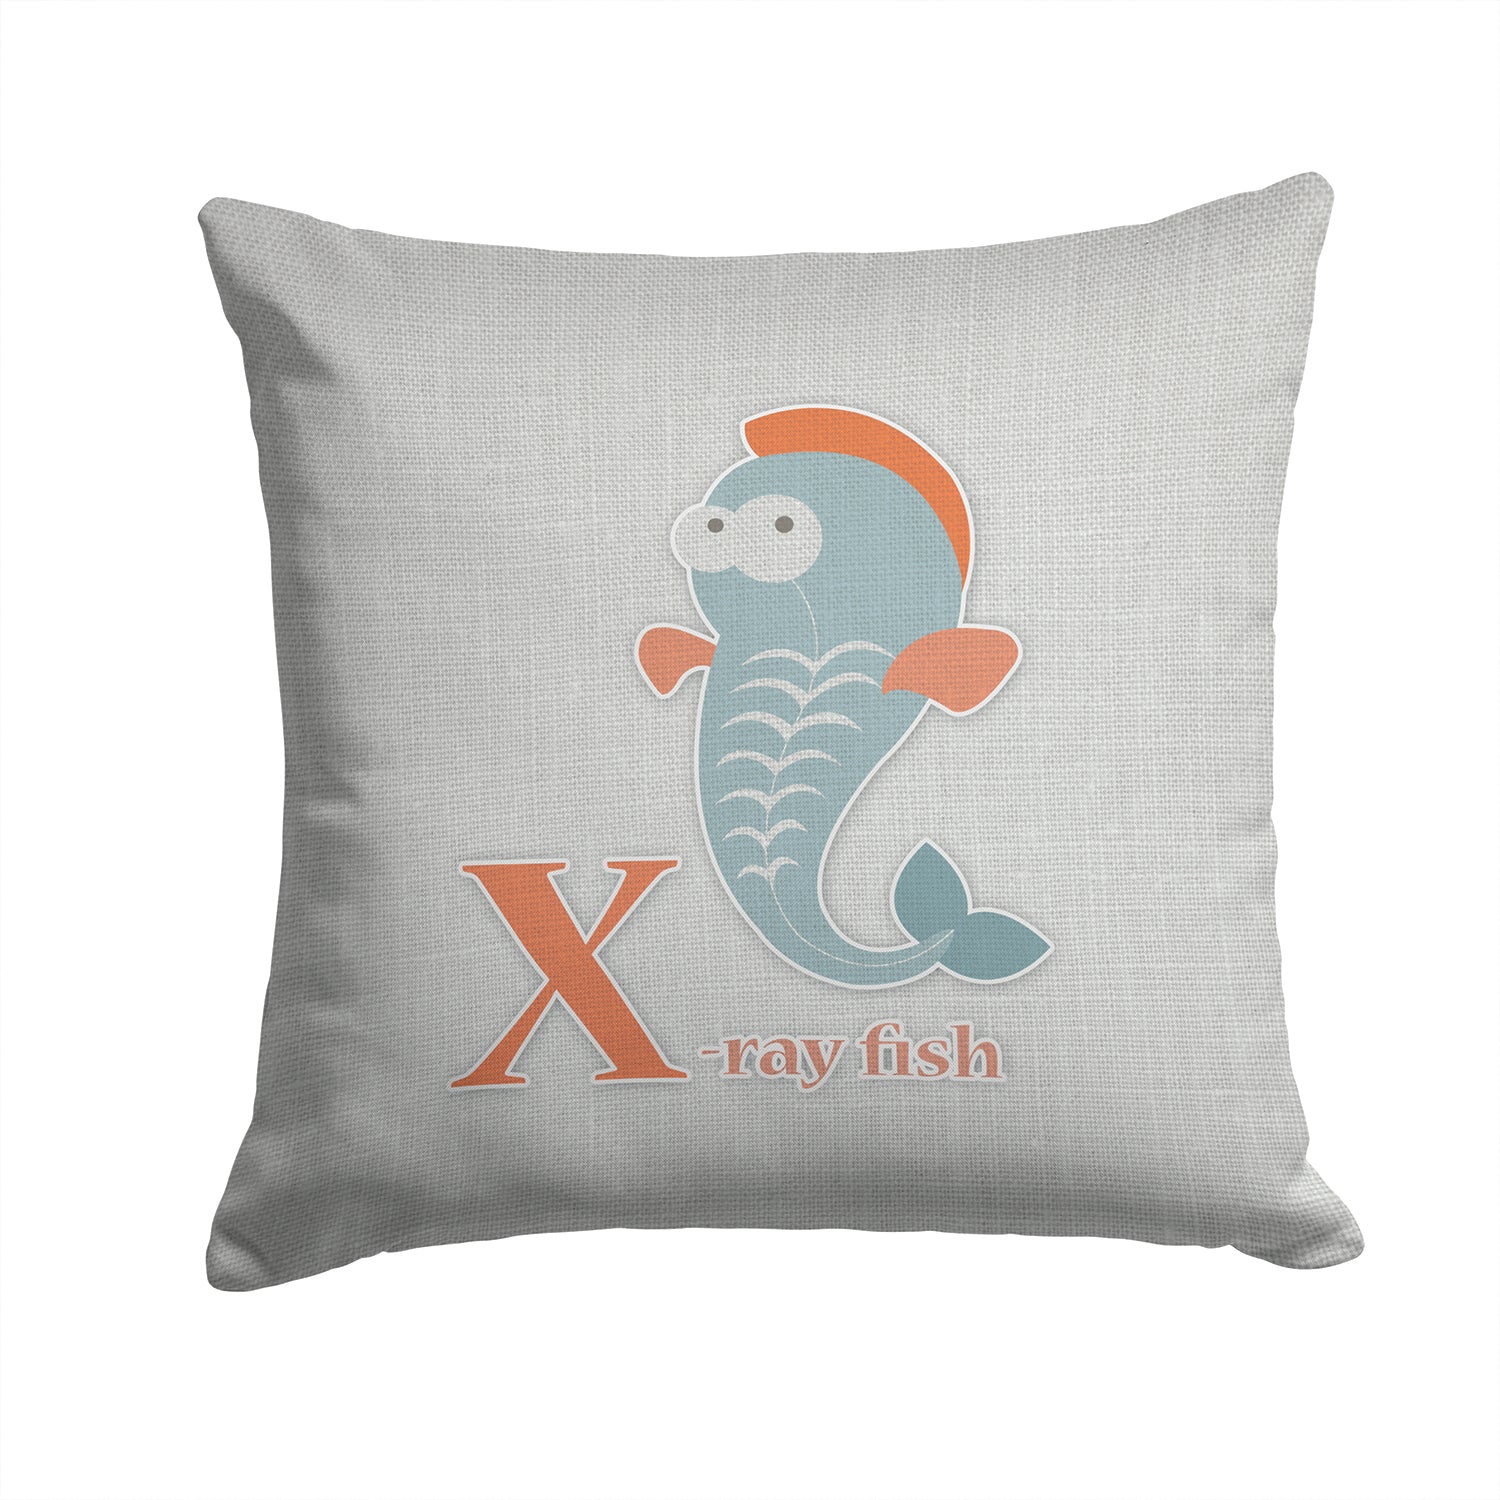 Alphabet X for Xray Fish Fabric Decorative Pillow BB5749PW1414 - the-store.com